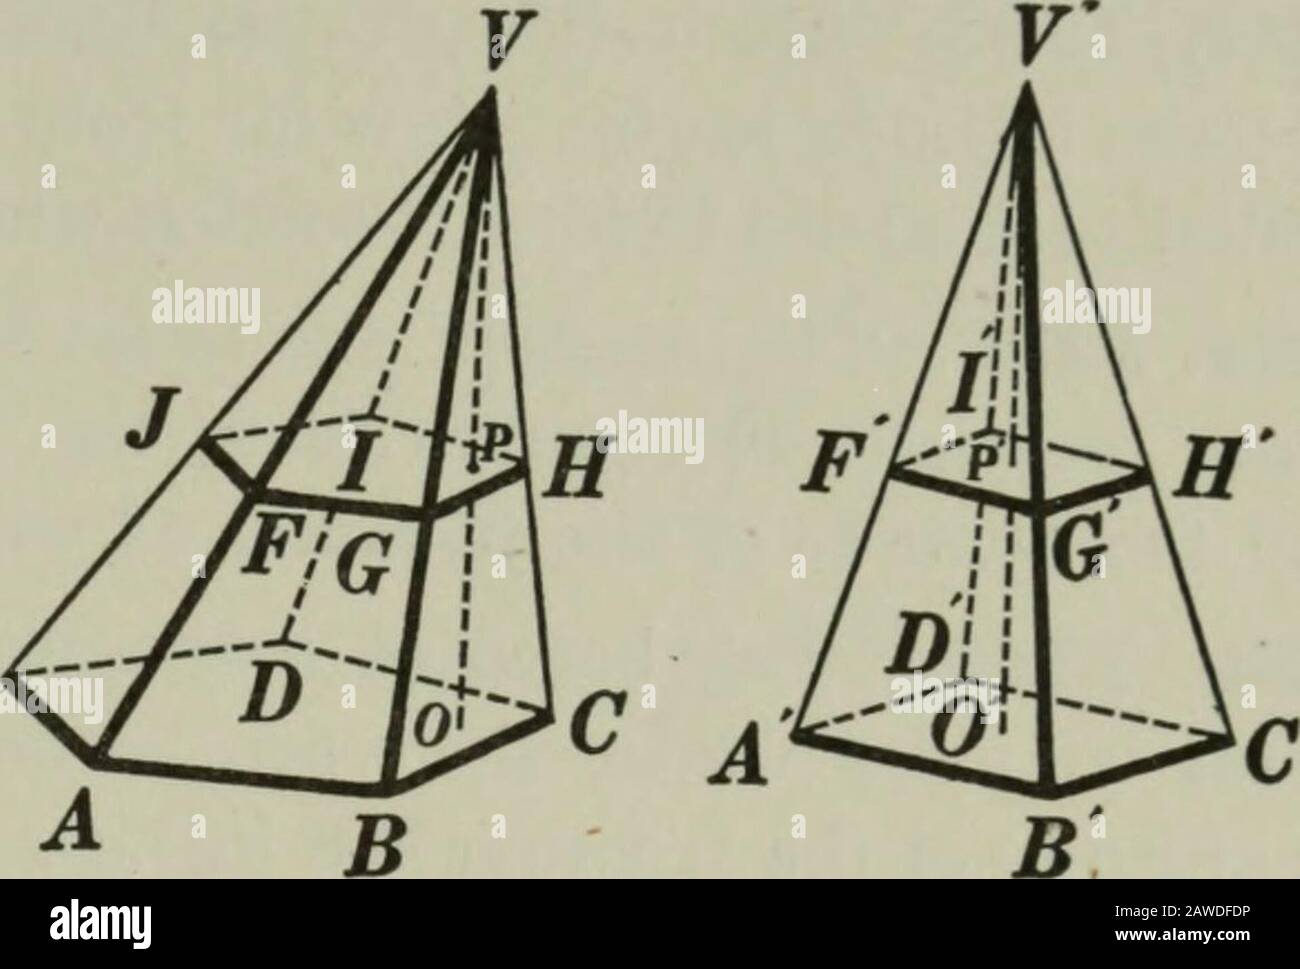 Plane and solid geometry . P. VB VC  ^ ^ — Z2.VF VG Vh  VP To prove: I. i^ VG VHII. FGHIJ^ ABODE. I. Argument 1. Through V pass plane RS II plane KL. 2. Then plane RS II plane MN. VA    VB VB    VC 3. VAVF VGVB VG VHVO VO VO . — = —, etc. VH VF ^t% • • ?^? VOVP = . Q.E.D. Reasons 1. § 652. 2. § 654. 3. § 650. 4. § 54, 1. VG VH11. The proof of II is left as an exercise for the student. 757. Cor I. Ally section of a pyramid ])arallel to thebase is to tJw base as the square of its distance fr.om thevertex is to the square of the altitude of the pyramid. Hint. Prove FCf yCr yp Aii- VB VO BOOK VI Stock Photo